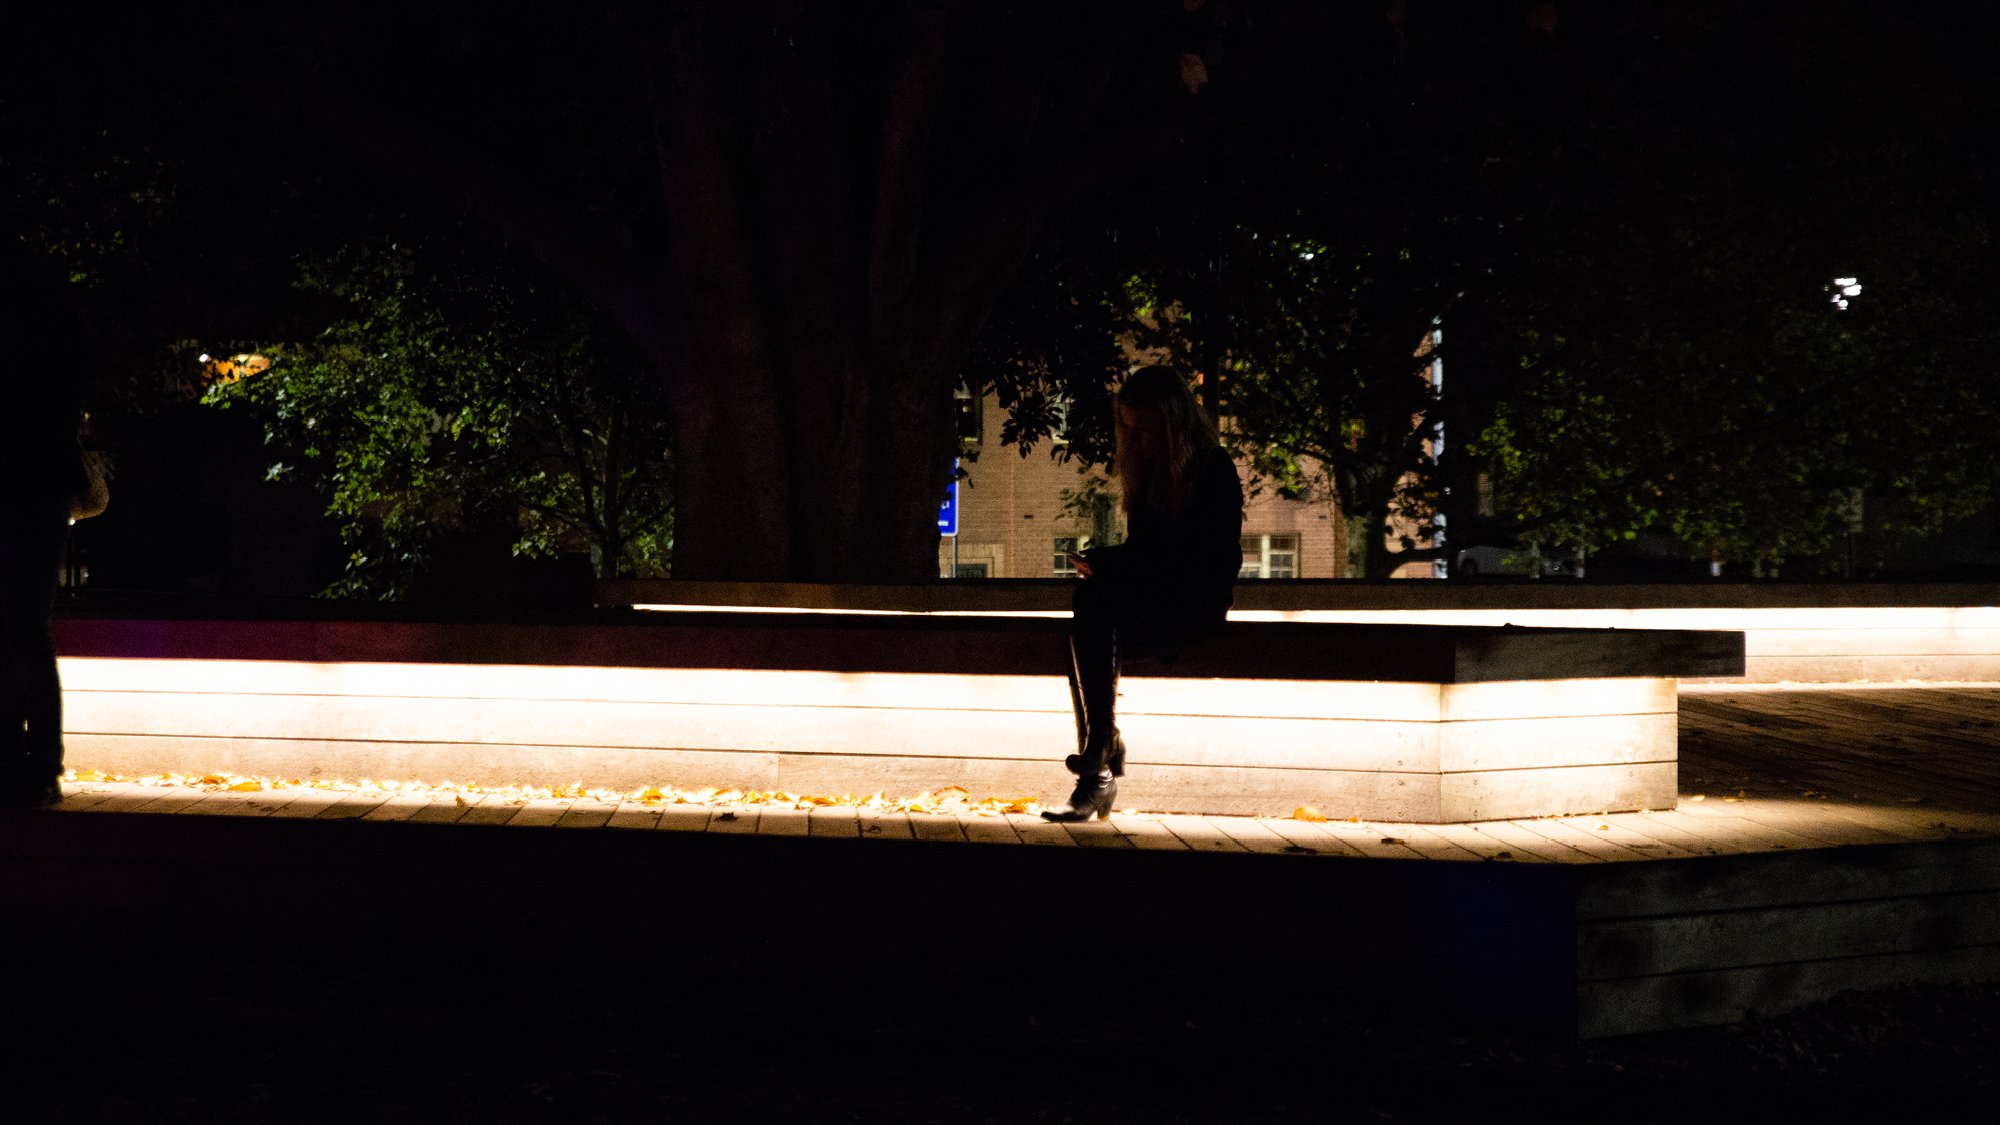 Woman sitting on a seat in the city at nighttime, with subdued lighting under and around seating